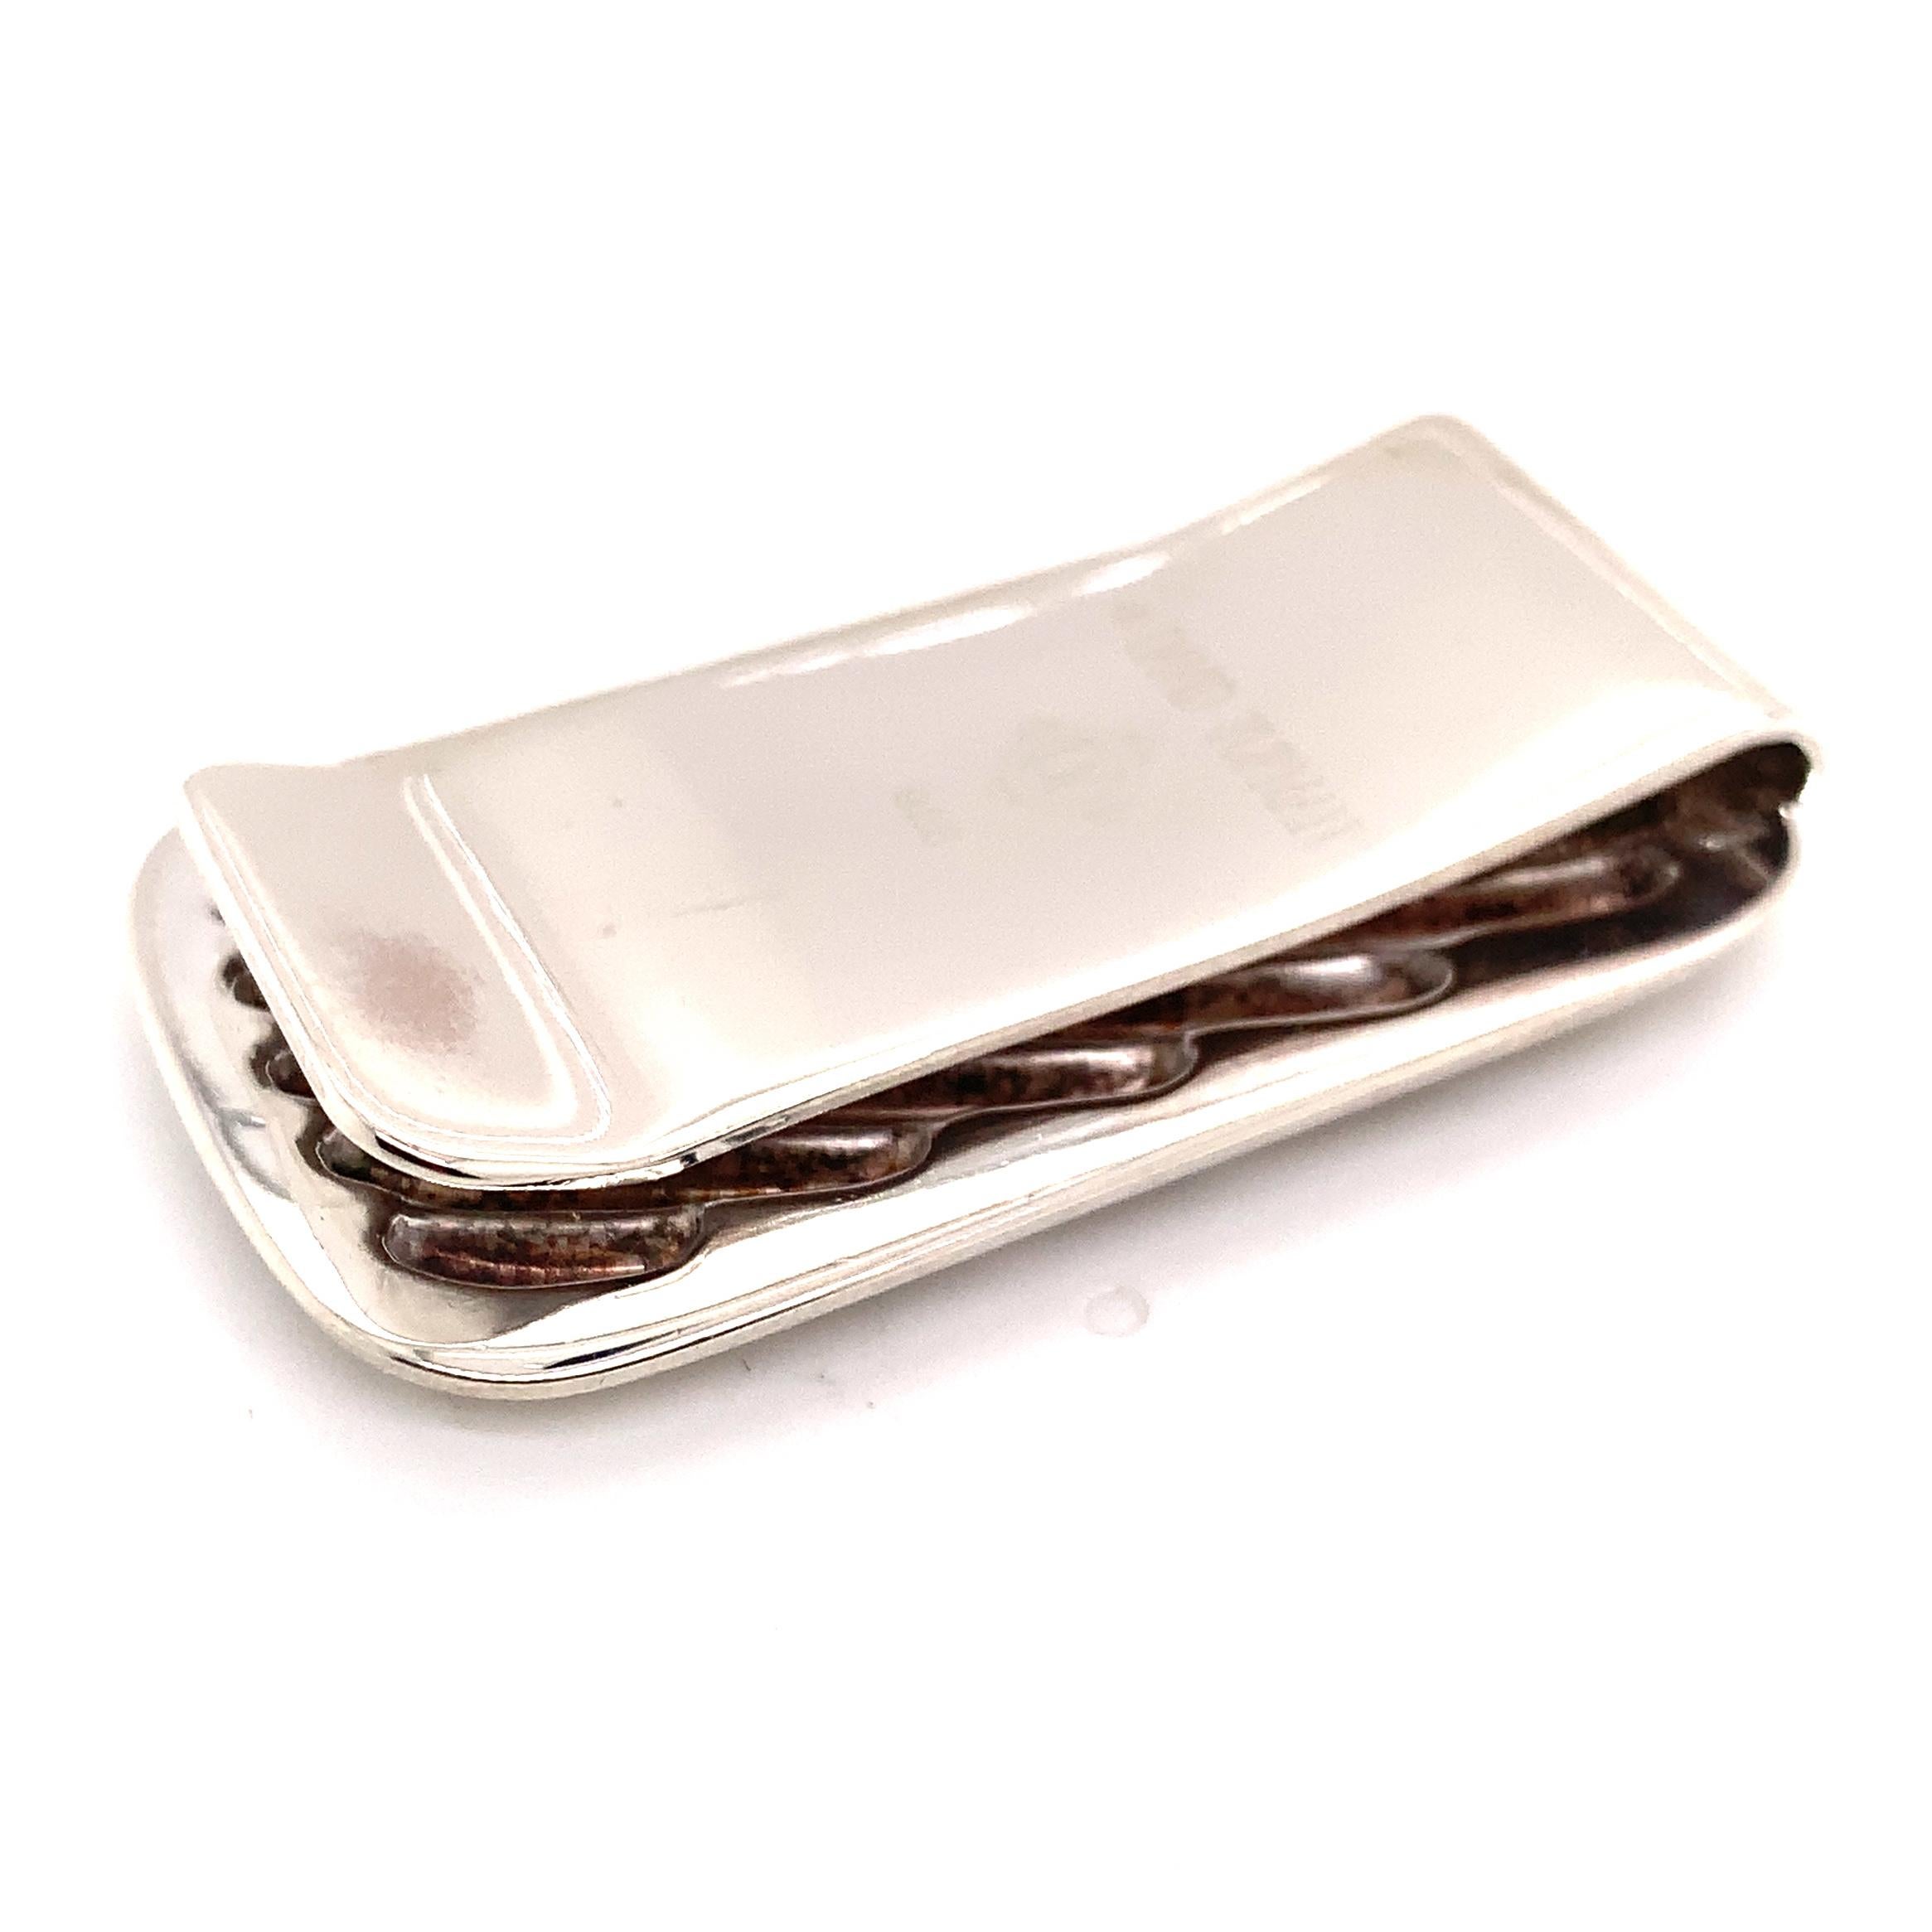 David Yurman Estate Large Cable Money Clip Sterling Silver DY125

Retail: $999.00

TRUSTED SELLER SINCE 2002

PLEASE SEE OUR HUNDREDS OF POSITIVE FEEDBACKS FROM OUR CLIENTS!!

FREE SHIPPING

This elegant Authentic David Yurman Men's sterling silver